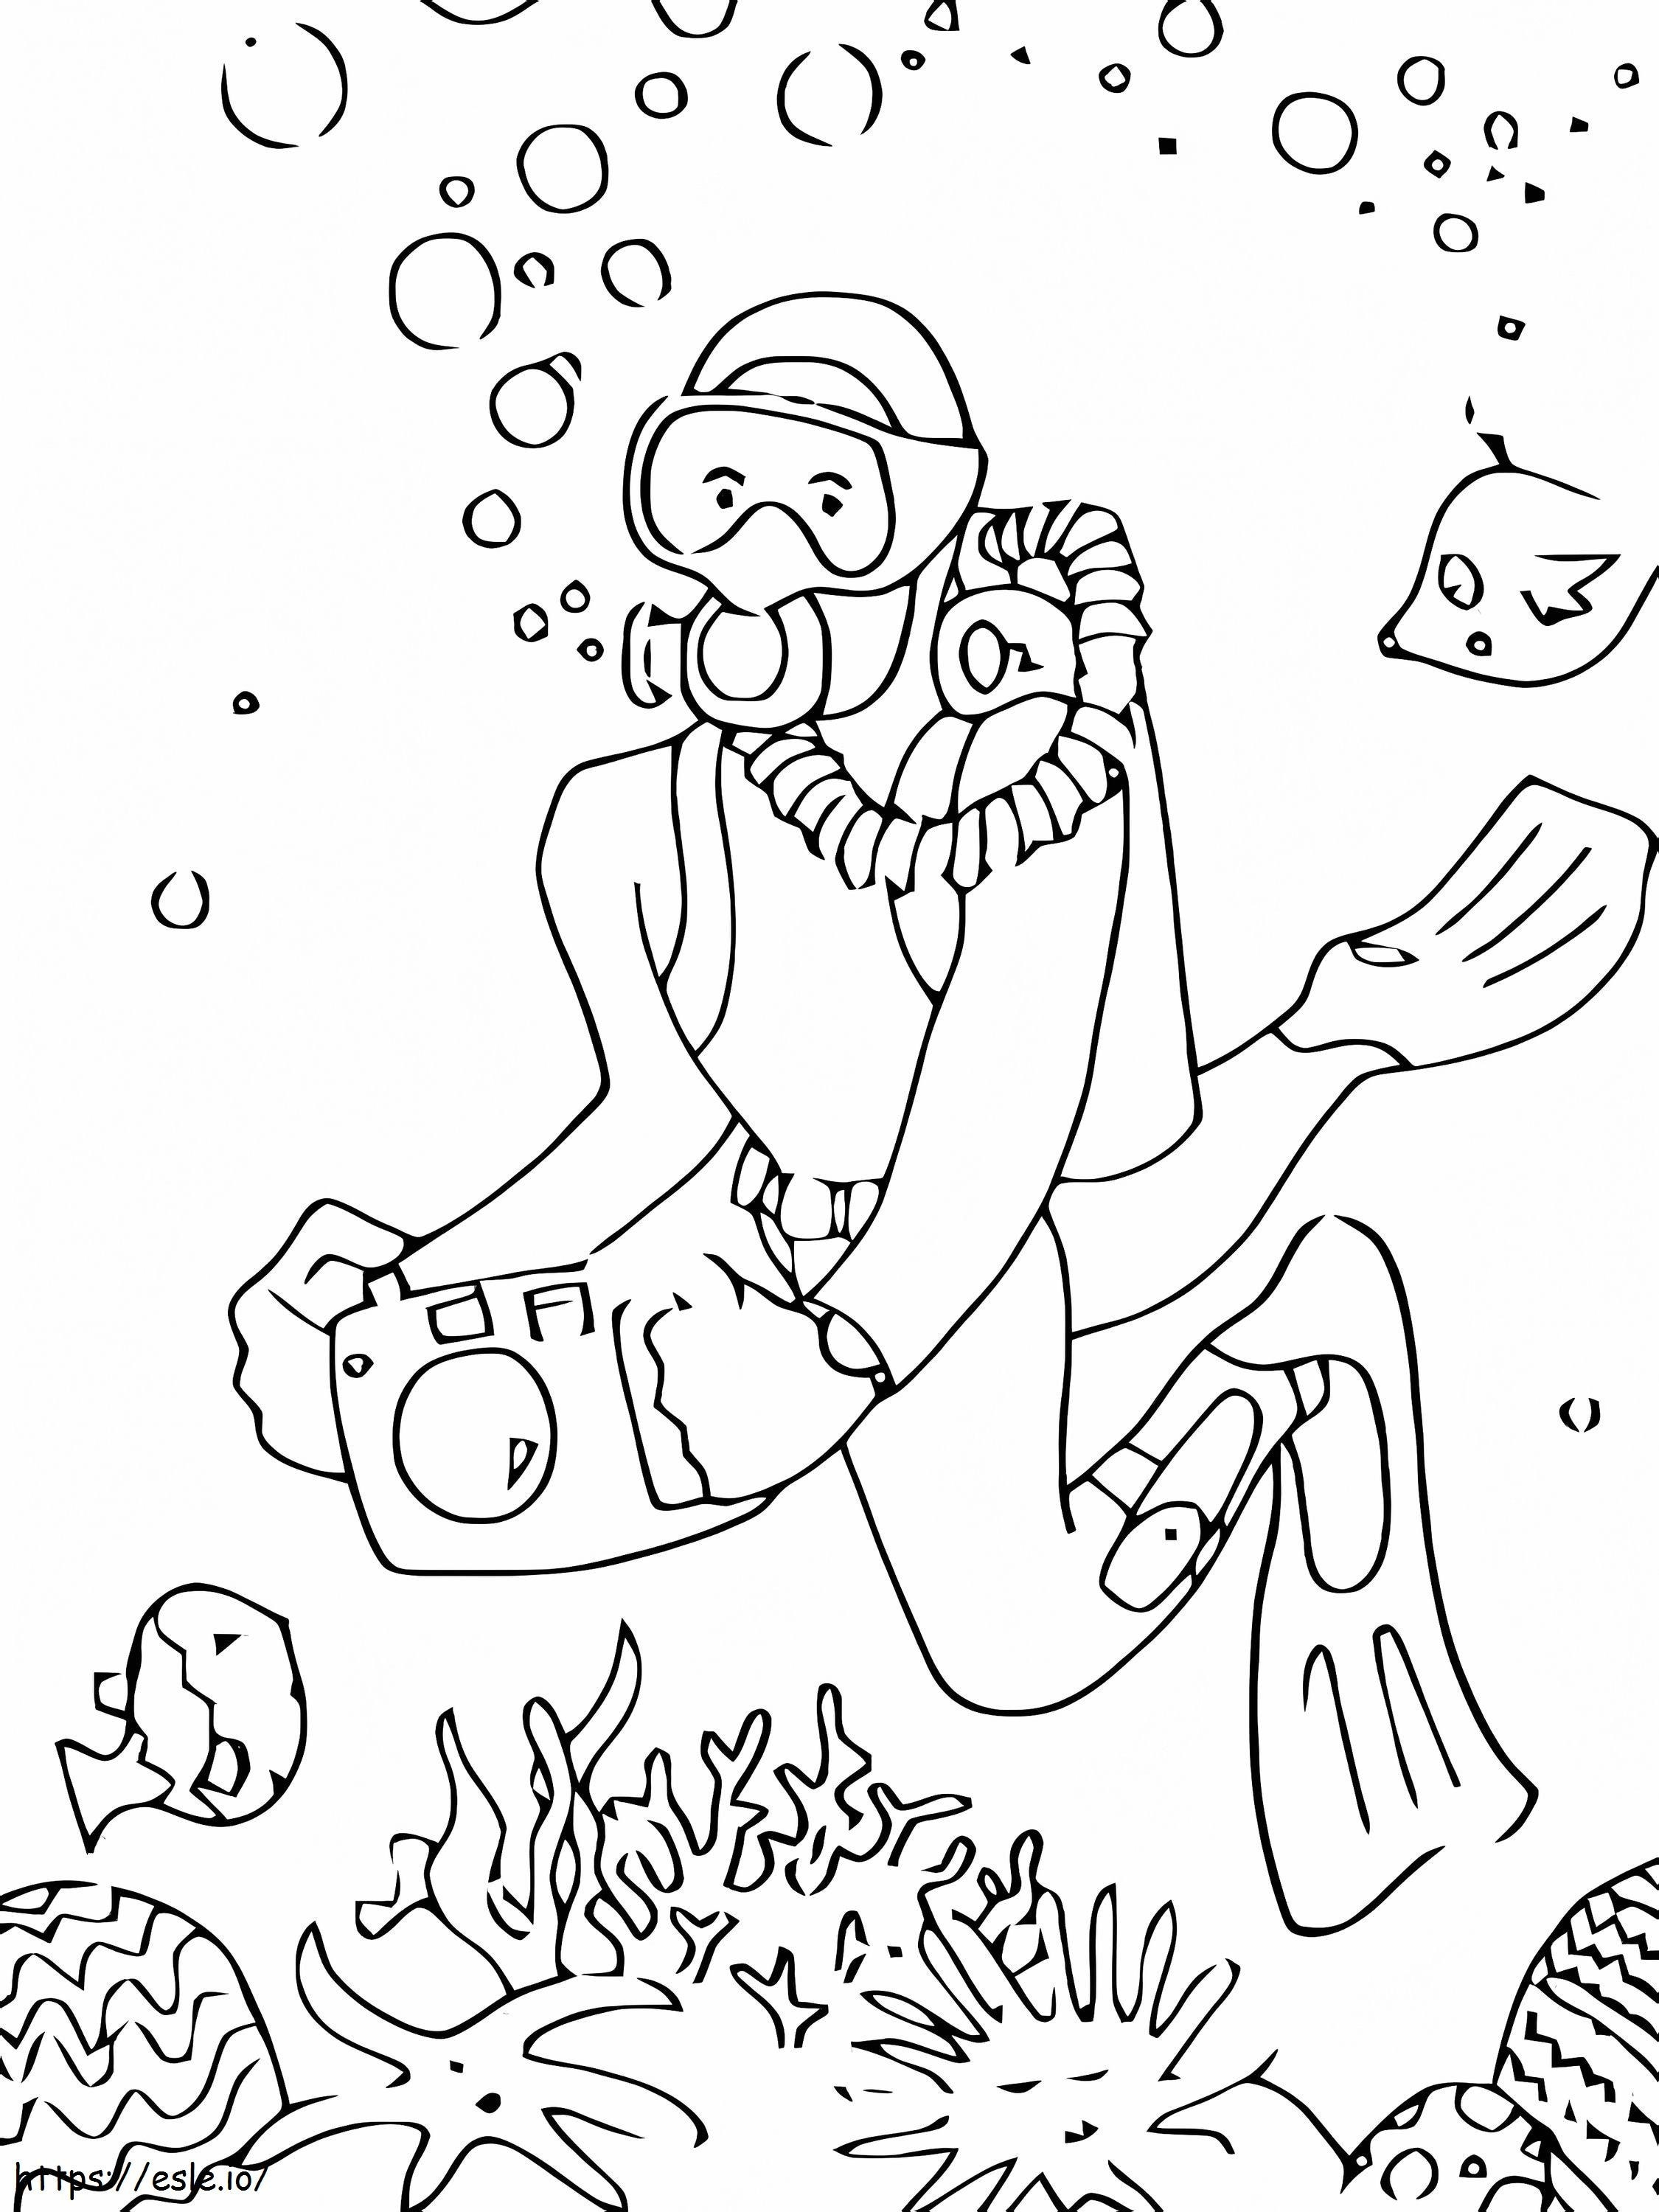 Scuba Diver With Camera coloring page